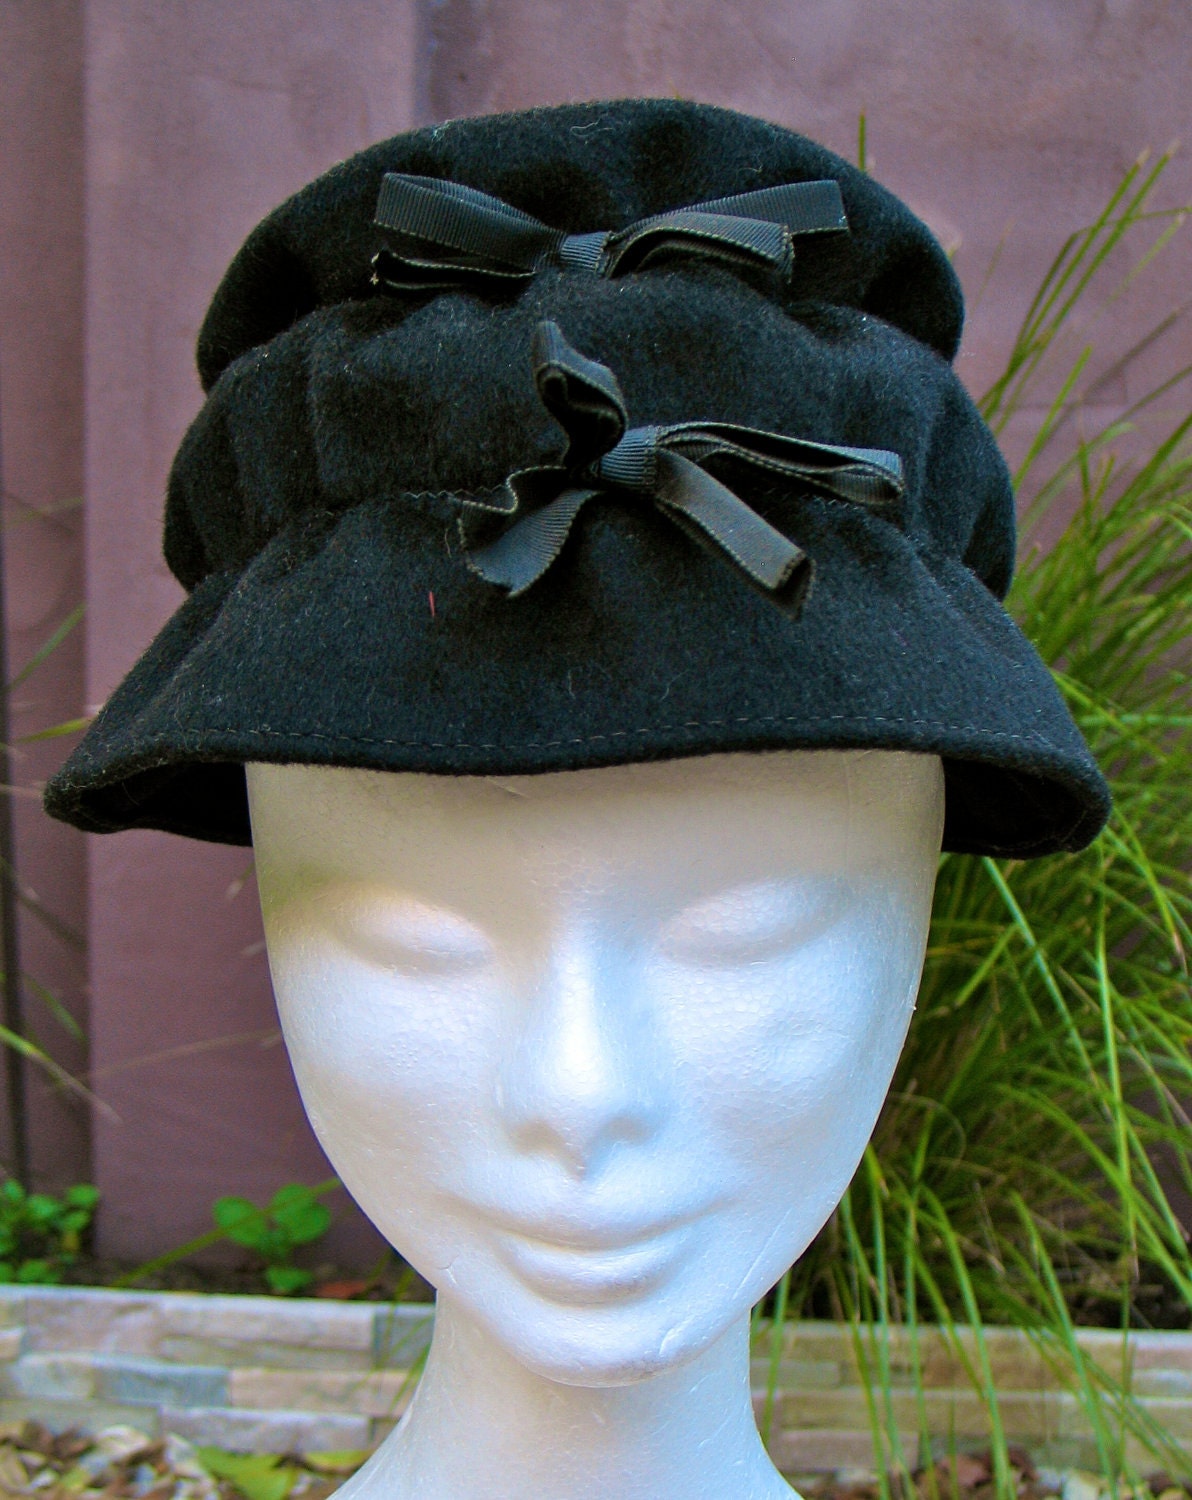 Ladies vintage hats for sale - 1940s, 50s | The Fedora Lounge